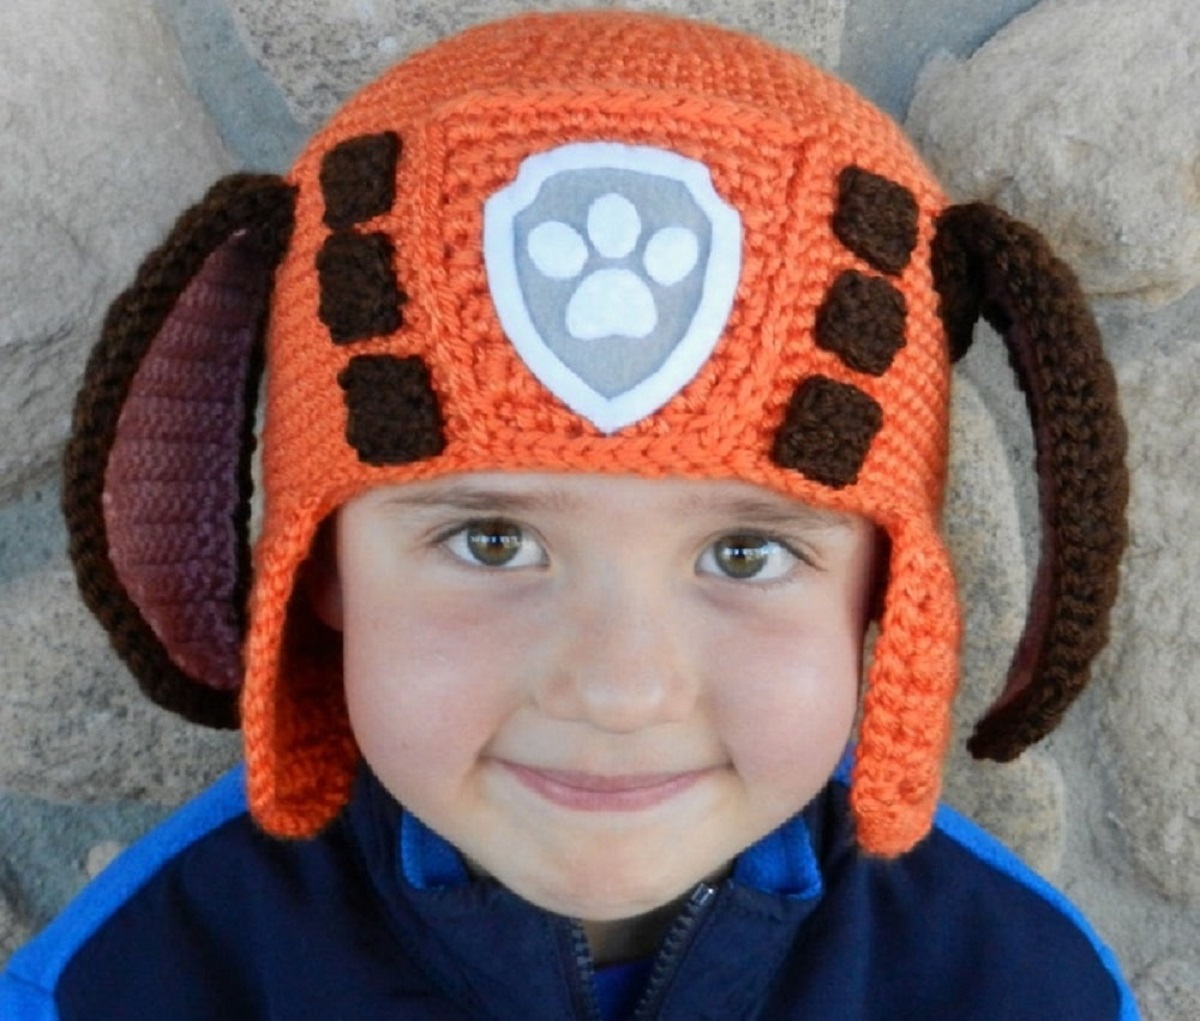 Young boy wearing an orange crochet hat with orange earflaps, large brown ears either side, and a gray Paw Patrol logo in the center of the hat.